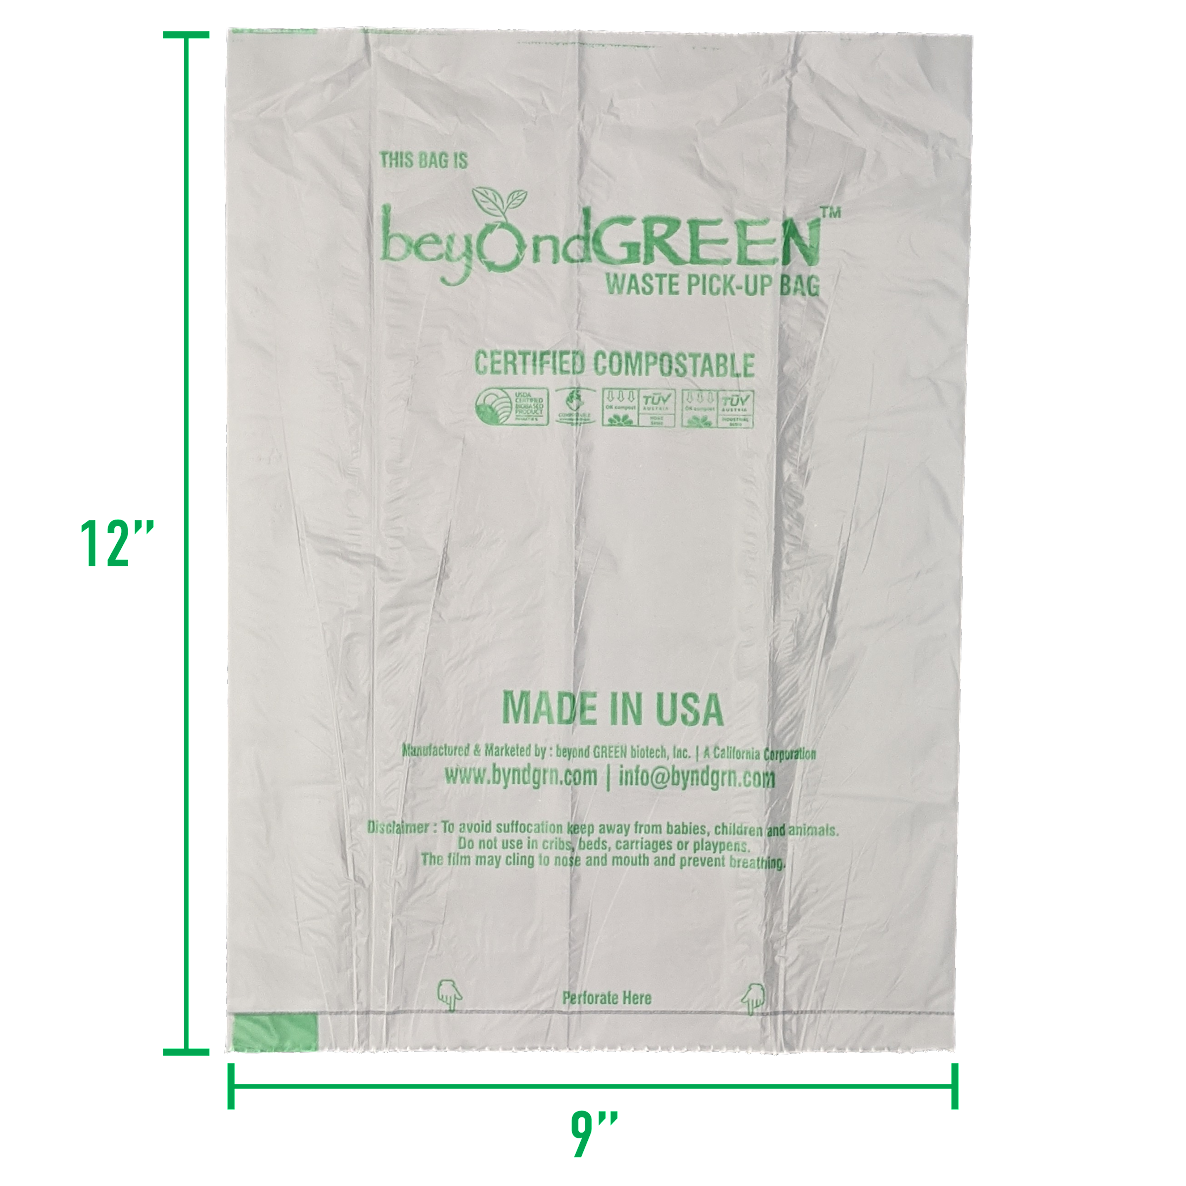 Beyond Green 100% Compostable Dog Waste Bags  Roll of 15 bags 9" x 12" Made in USA. TUV OK Home & TUV OK Industrial Compost